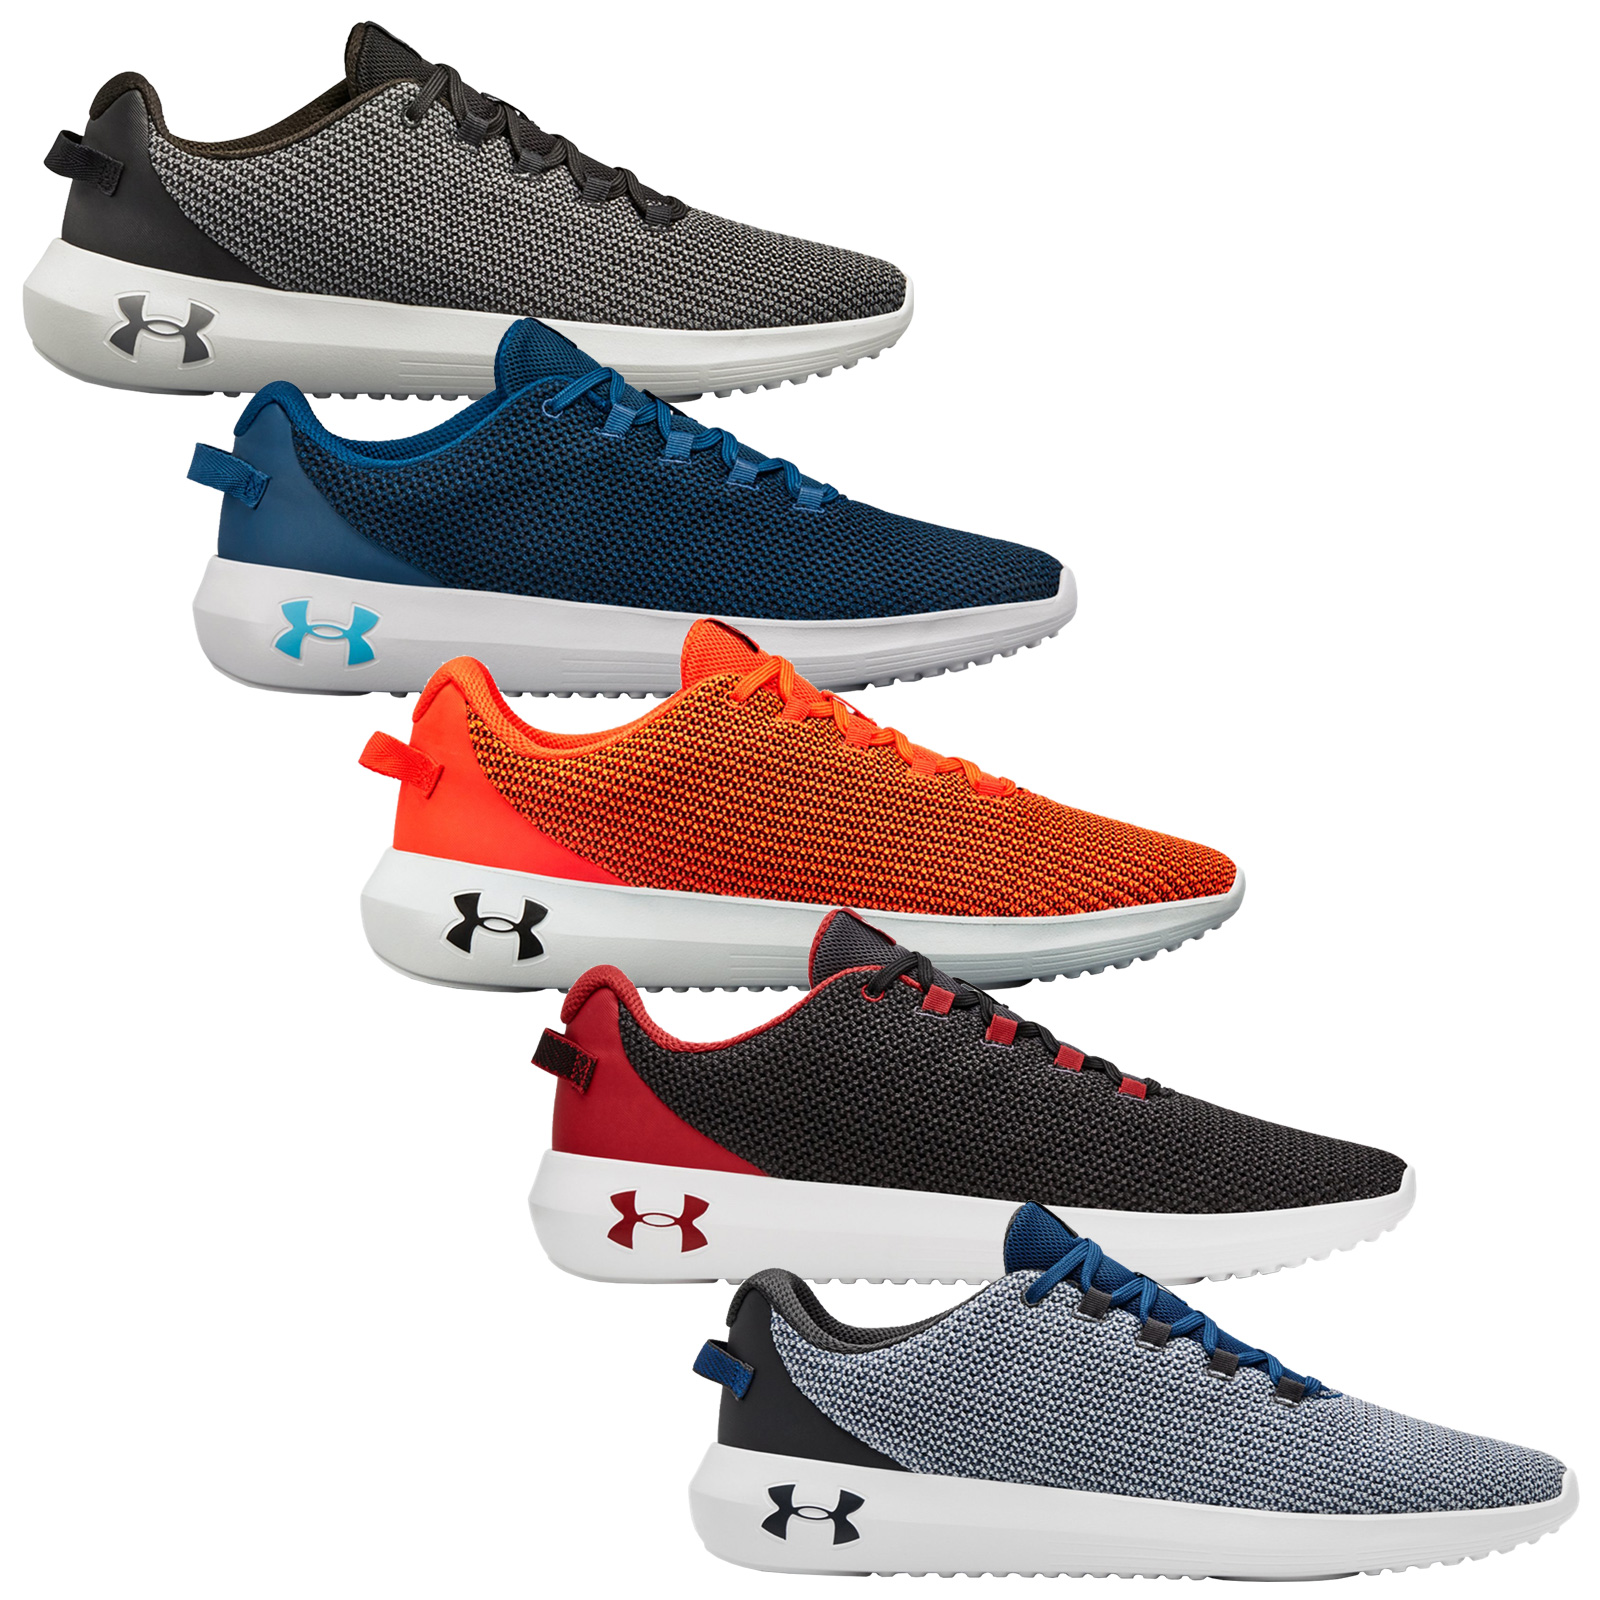 red under armour mens shoes